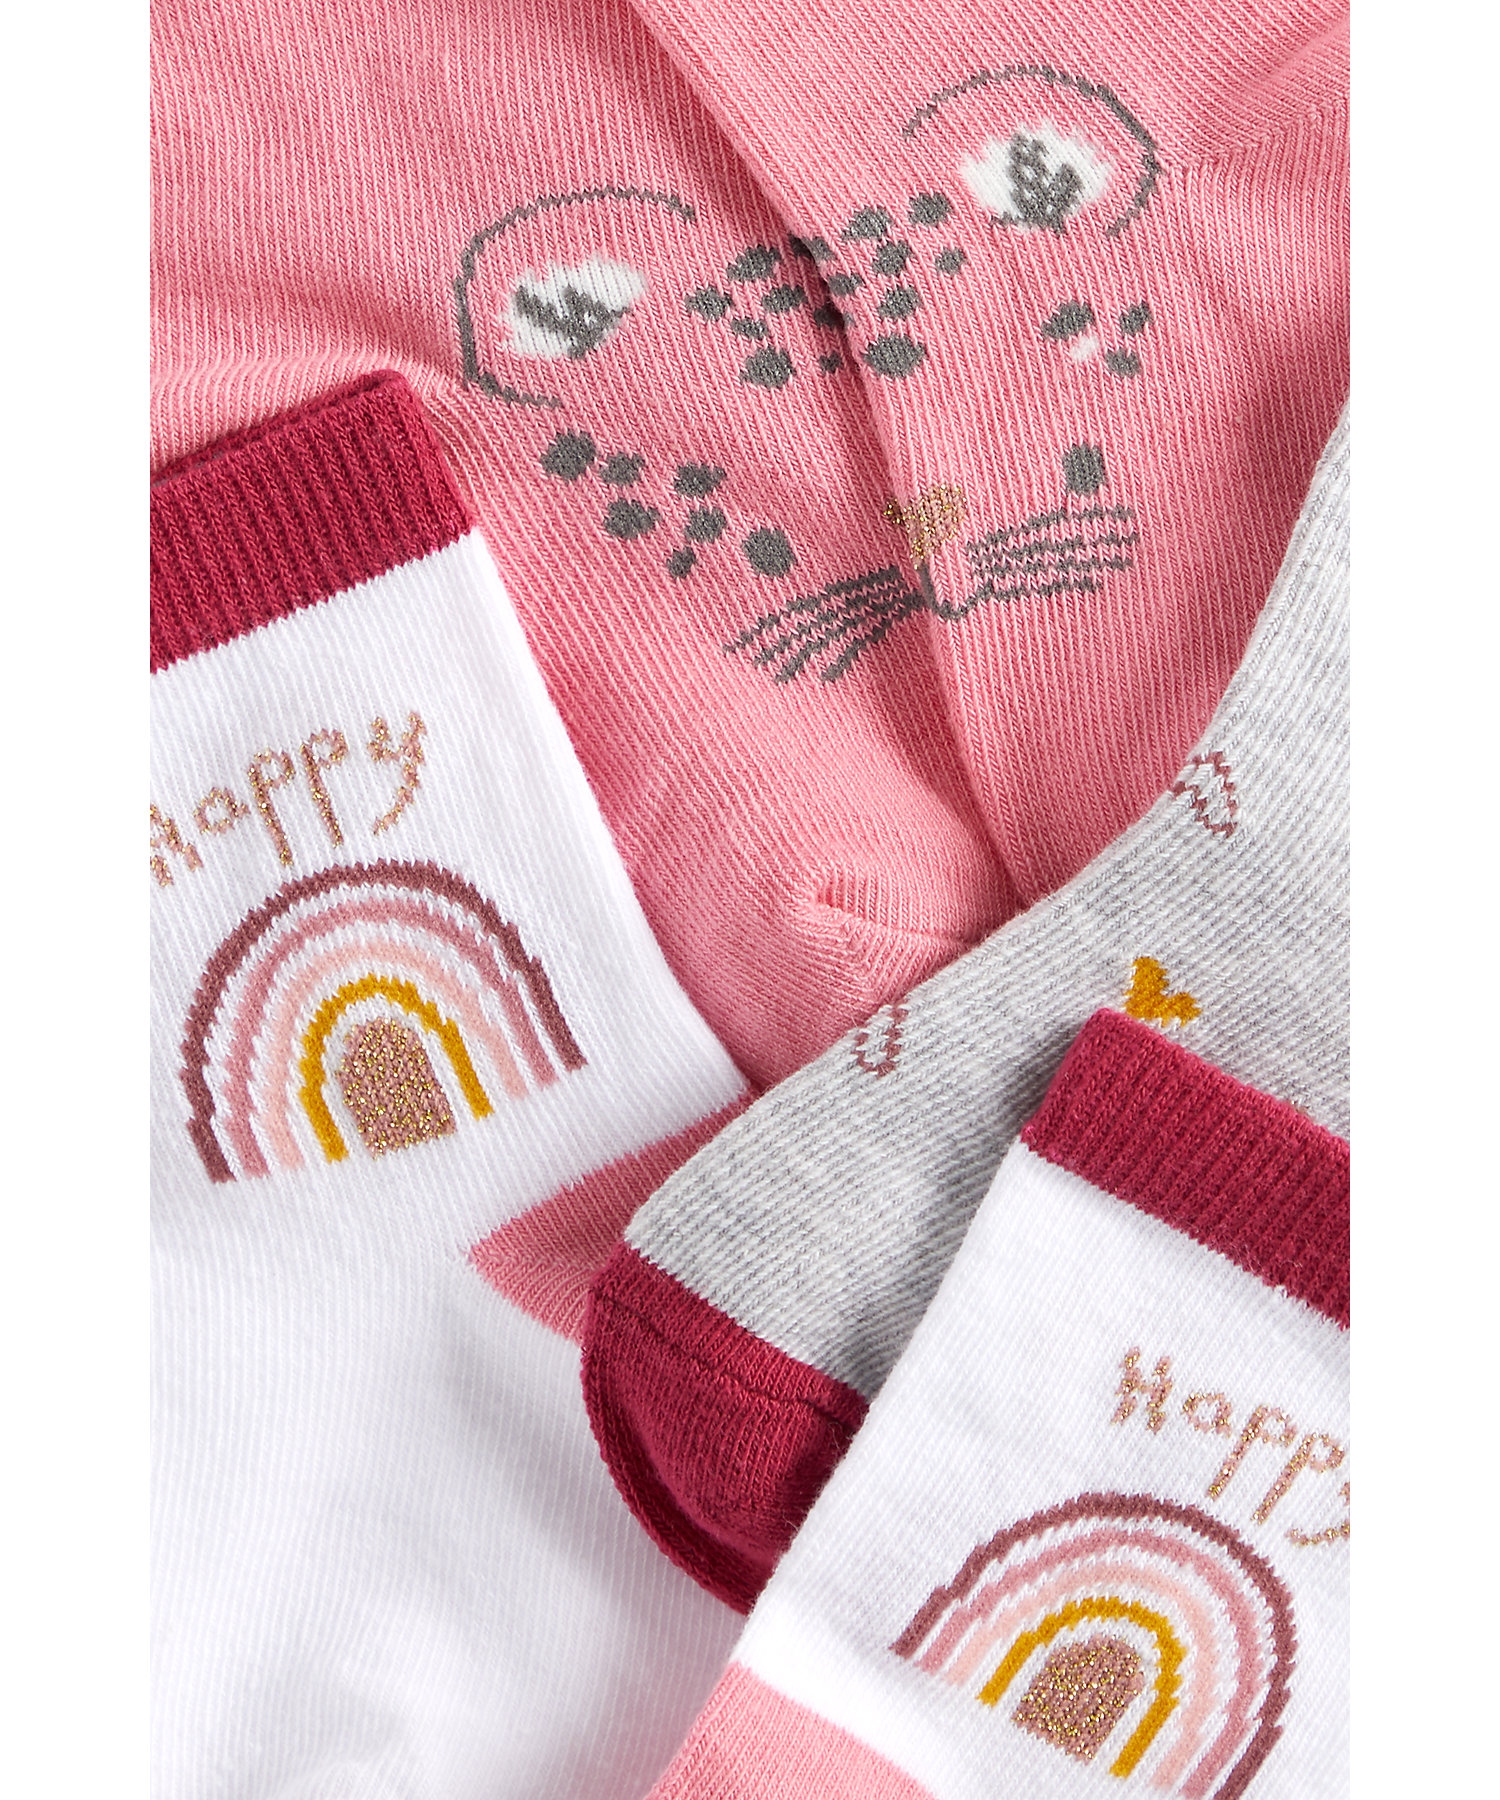 Mothercare | Girls Socks Rainbow And Heart Design - Pack Of 3 - Pink 2